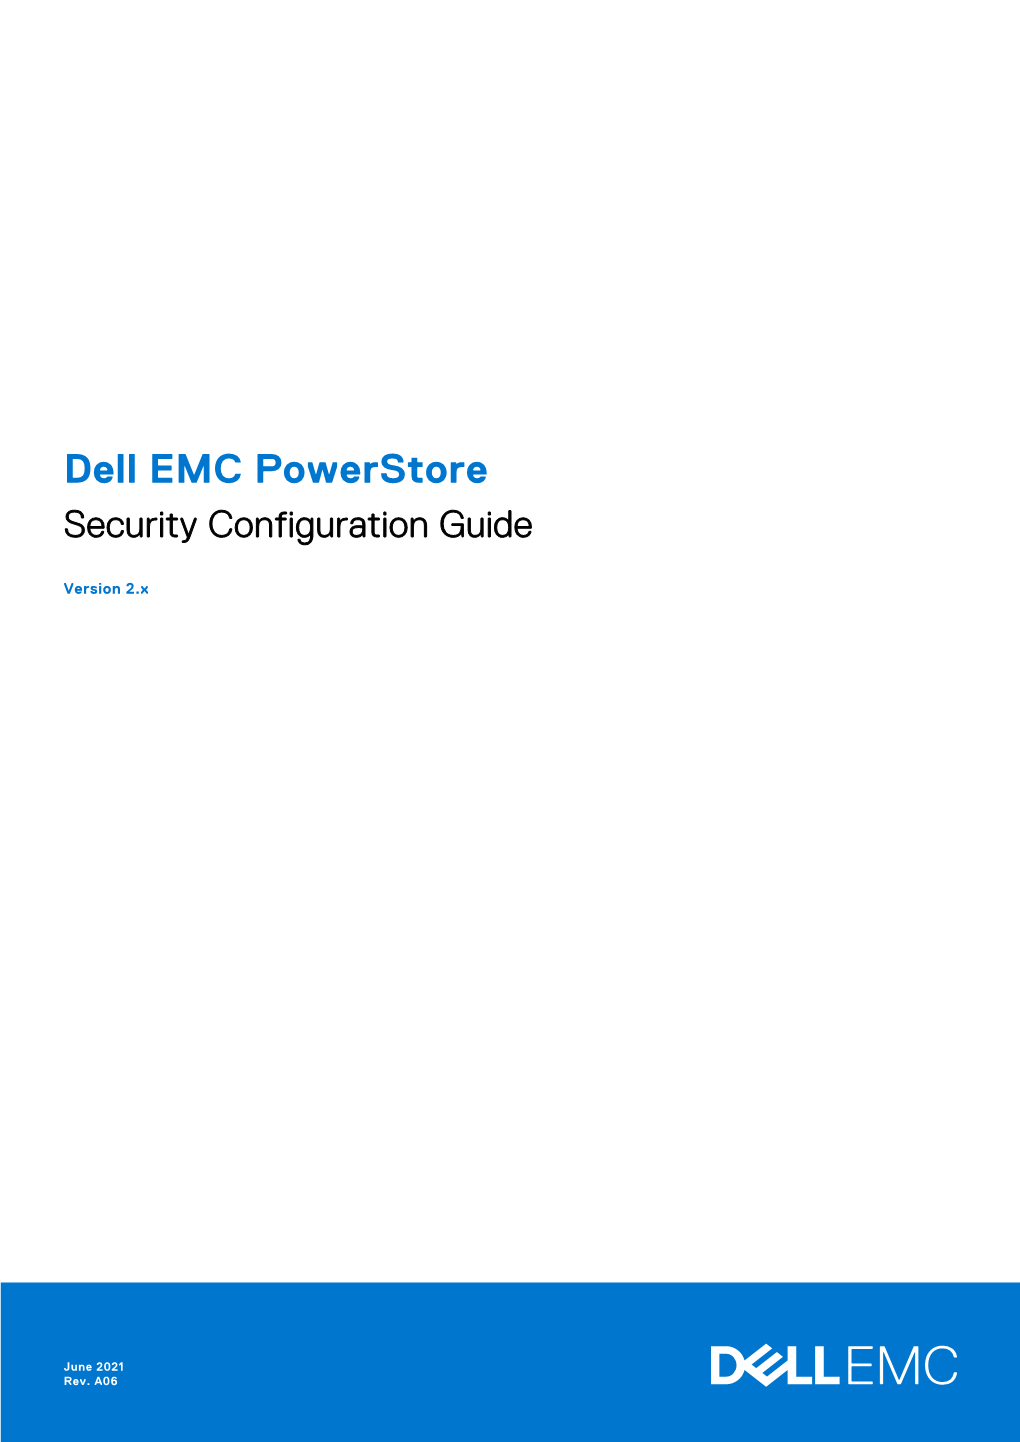 Dell EMC Powerstore Security Configuration Guide